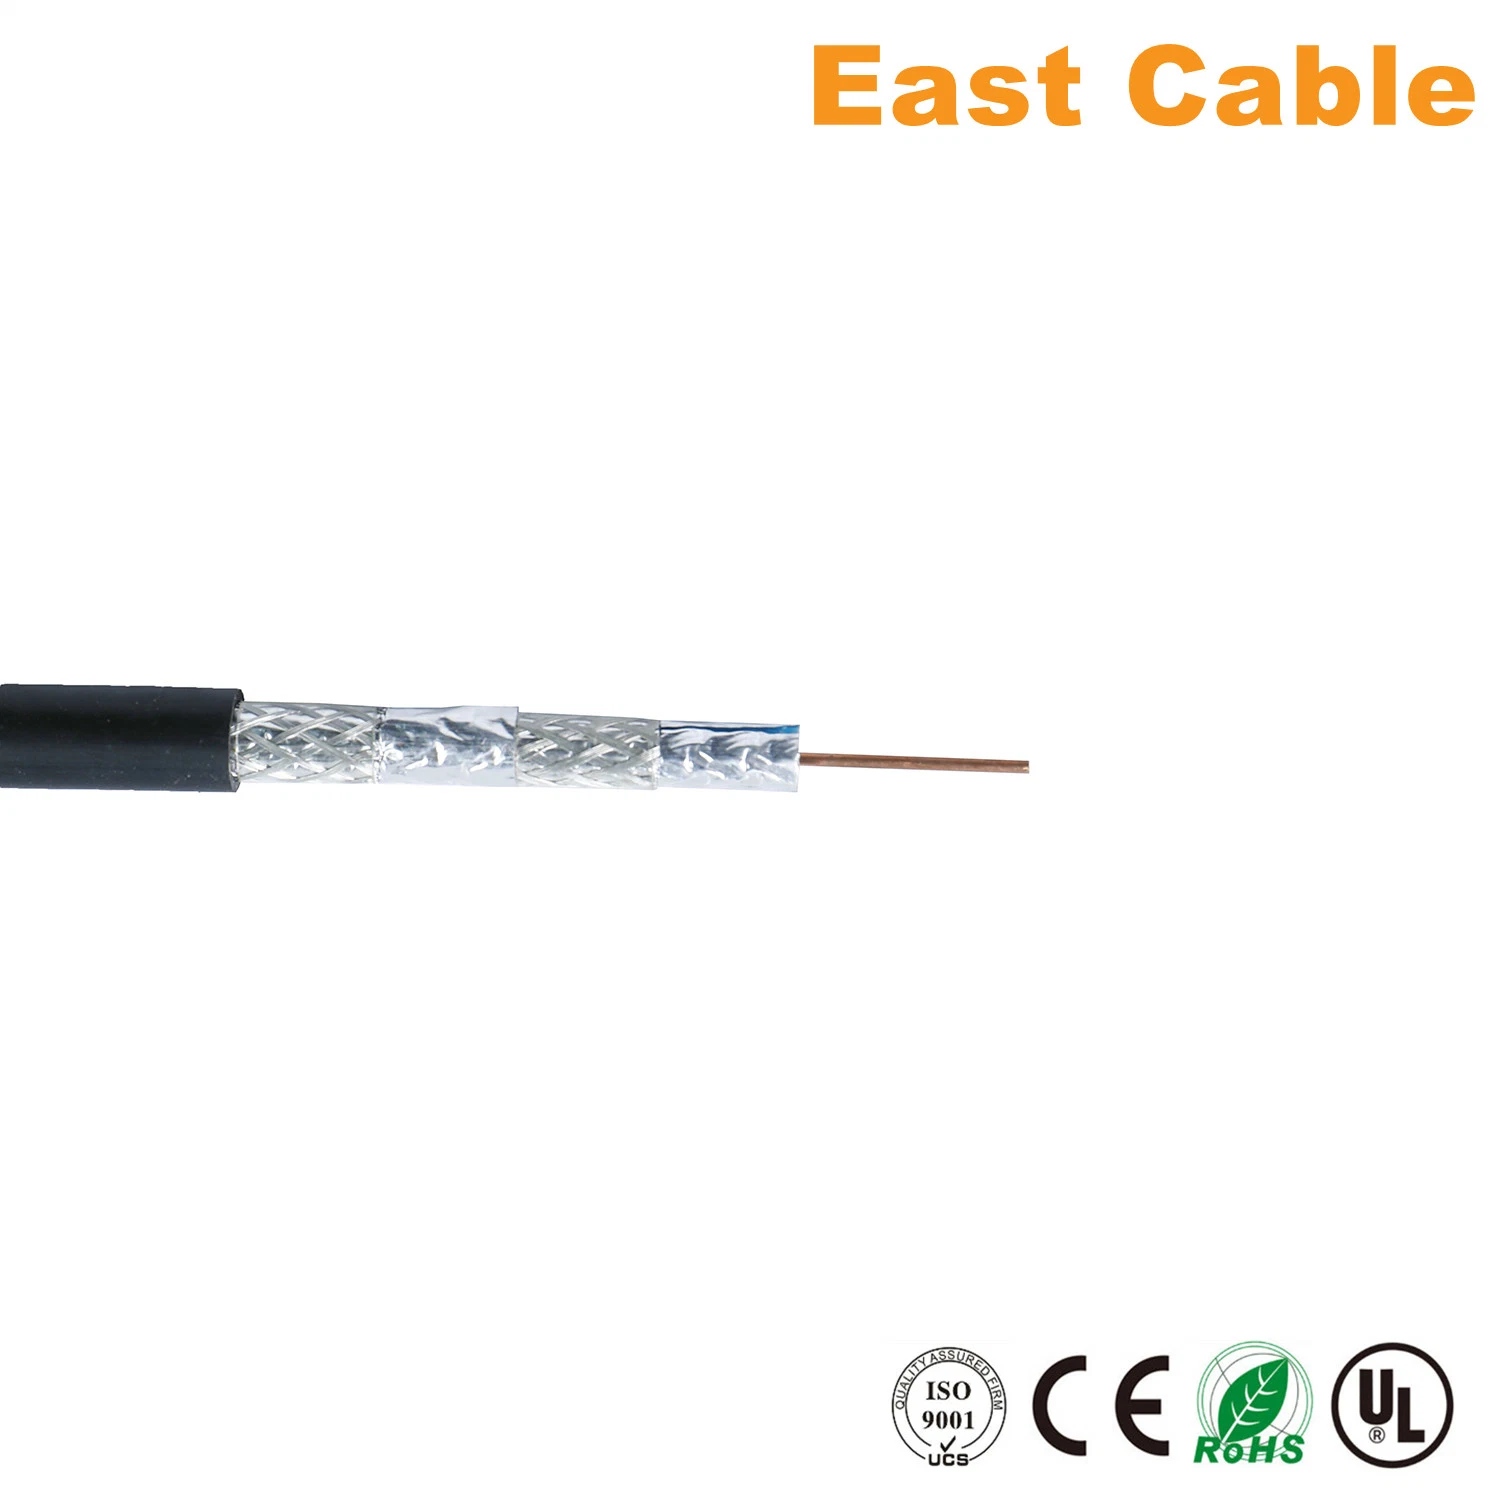 RG6, Rg/59 Coaxial Cable +2c Power Cable/Computer Cable/ Data Cable/ Communication Cable/ Connector/ Audio Cable